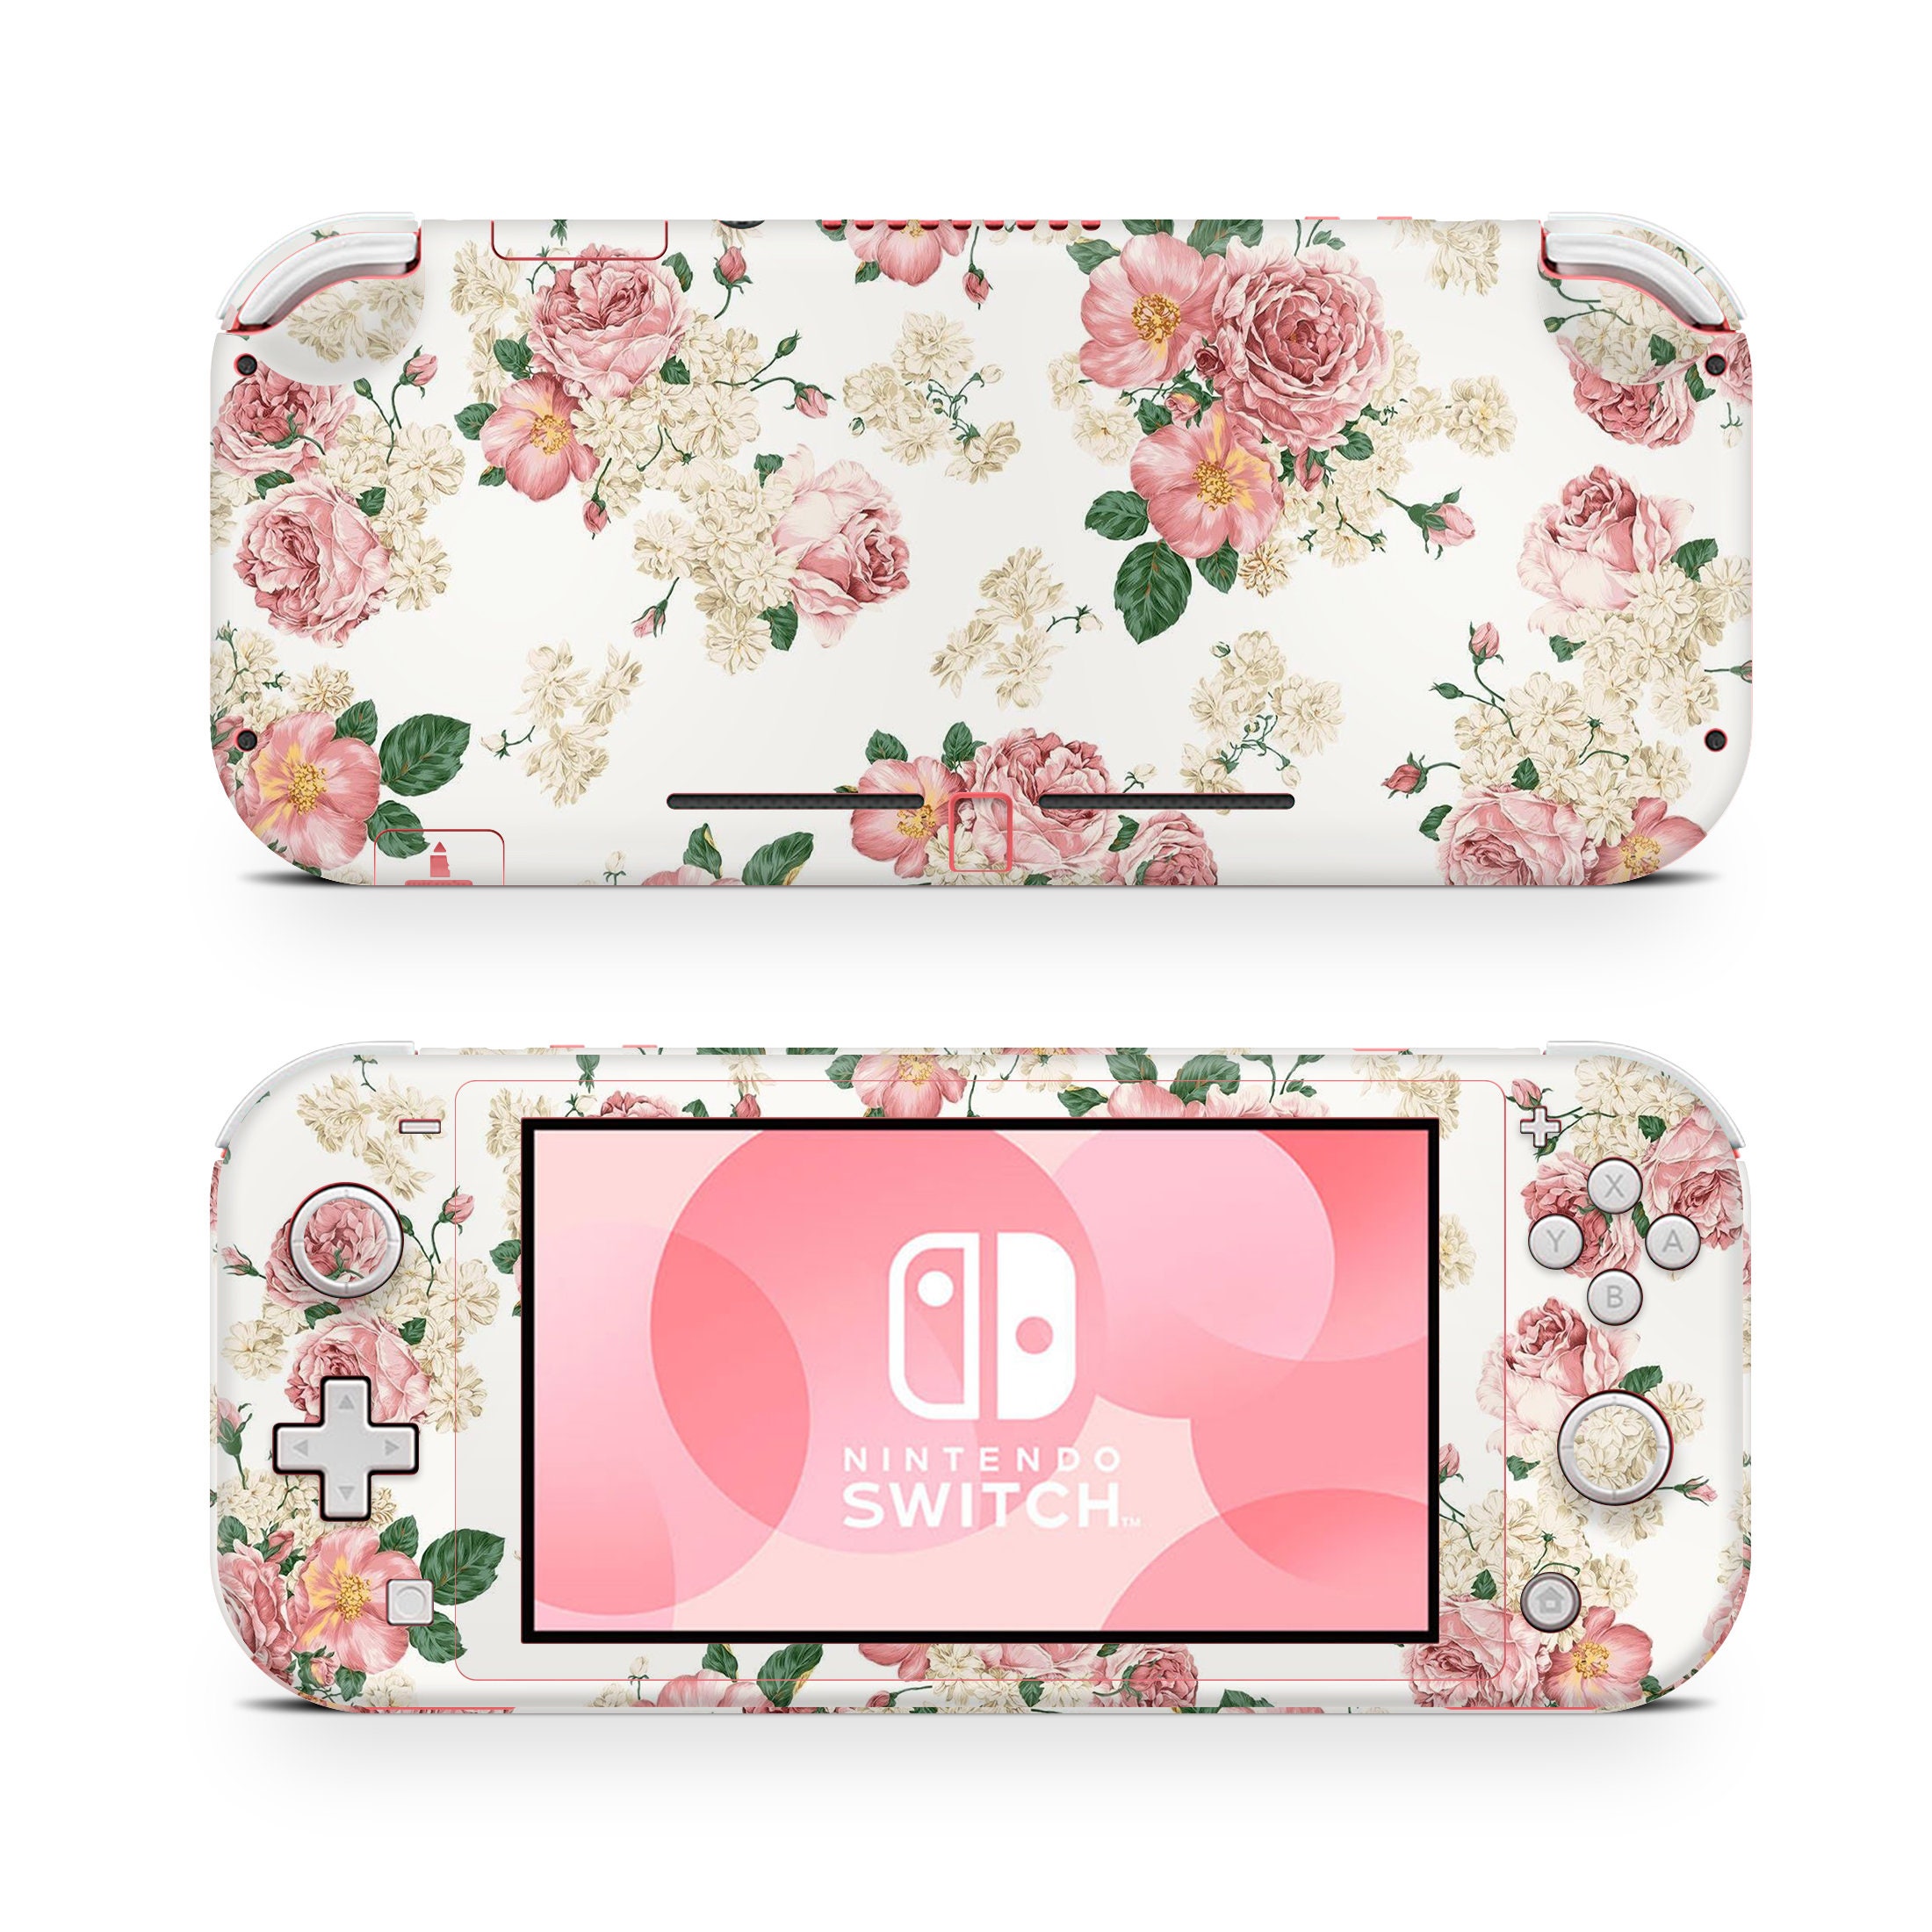 Nintendo Switch Lite Skin Decal for Game Console Old Vintage